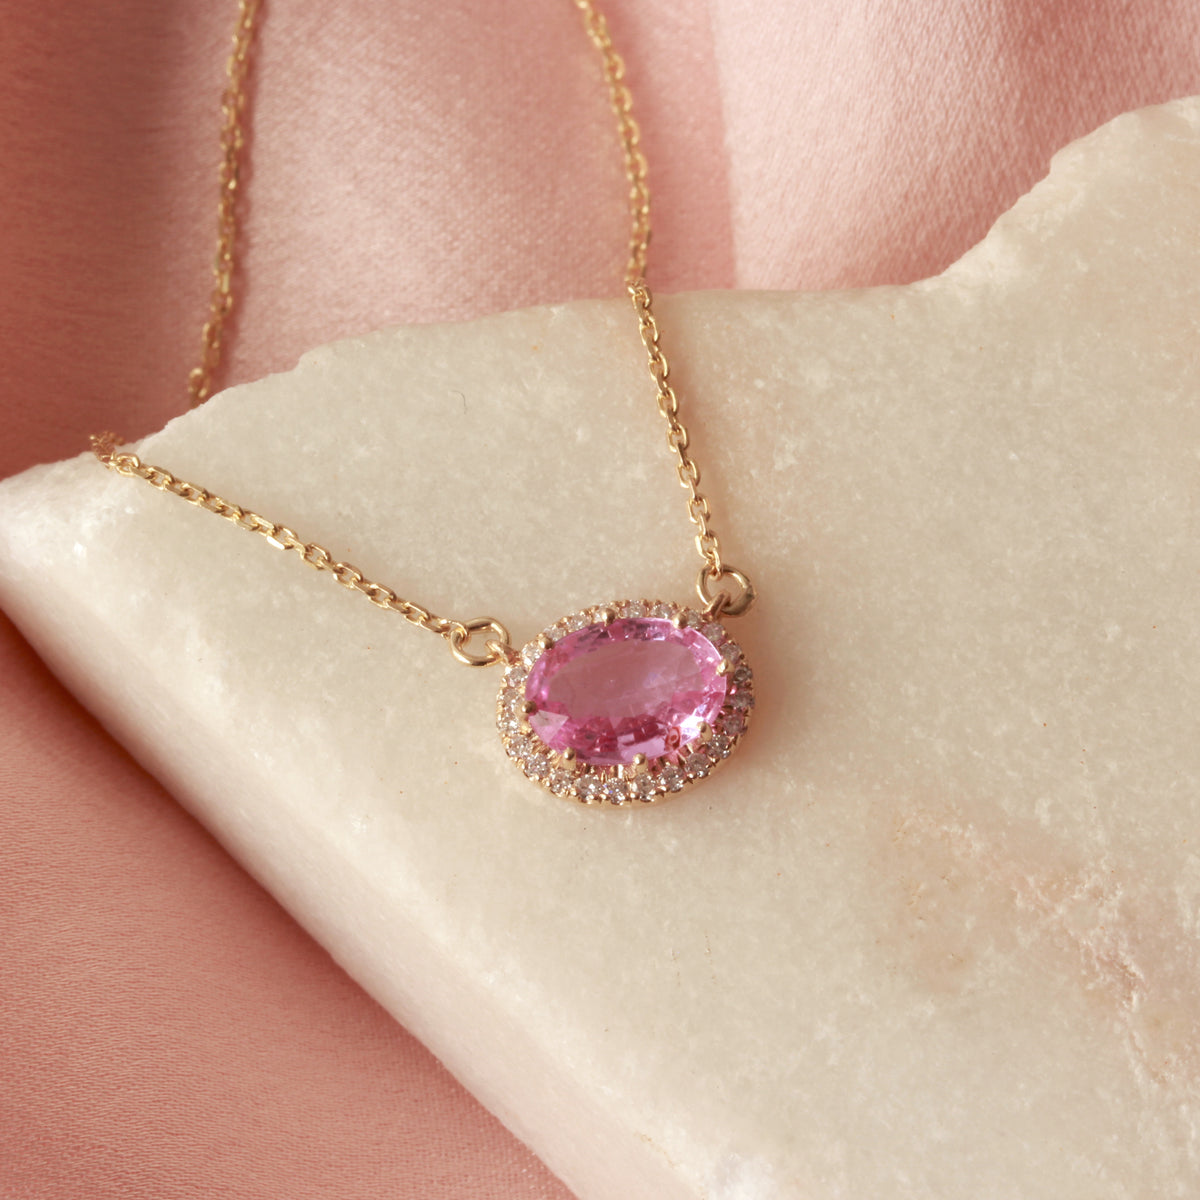 14K Yellow Gold Oval Pink Sapphire Halo Pendant Necklace